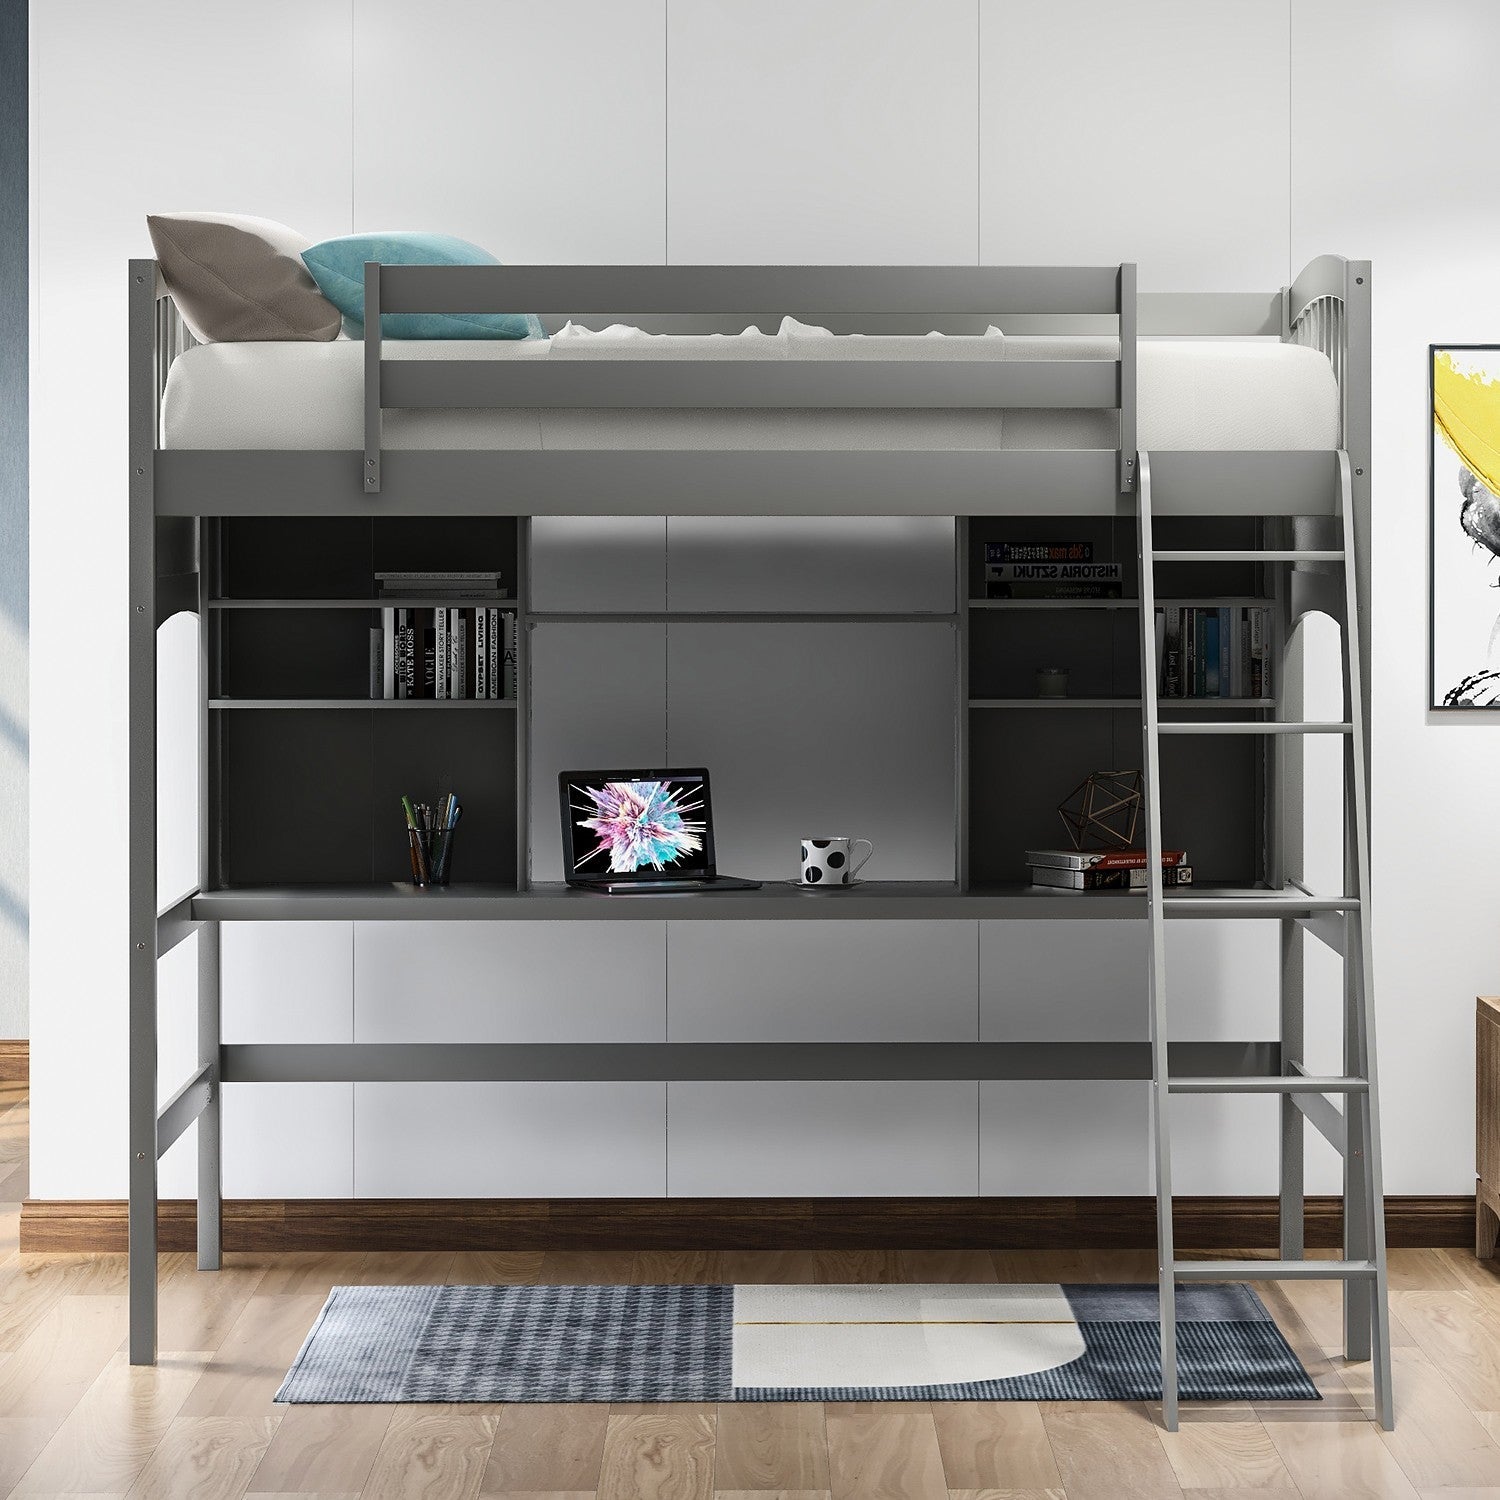 Gray Twin Size Loft Bed with Desk and Shelves - Tuesday Morning-Loft Beds